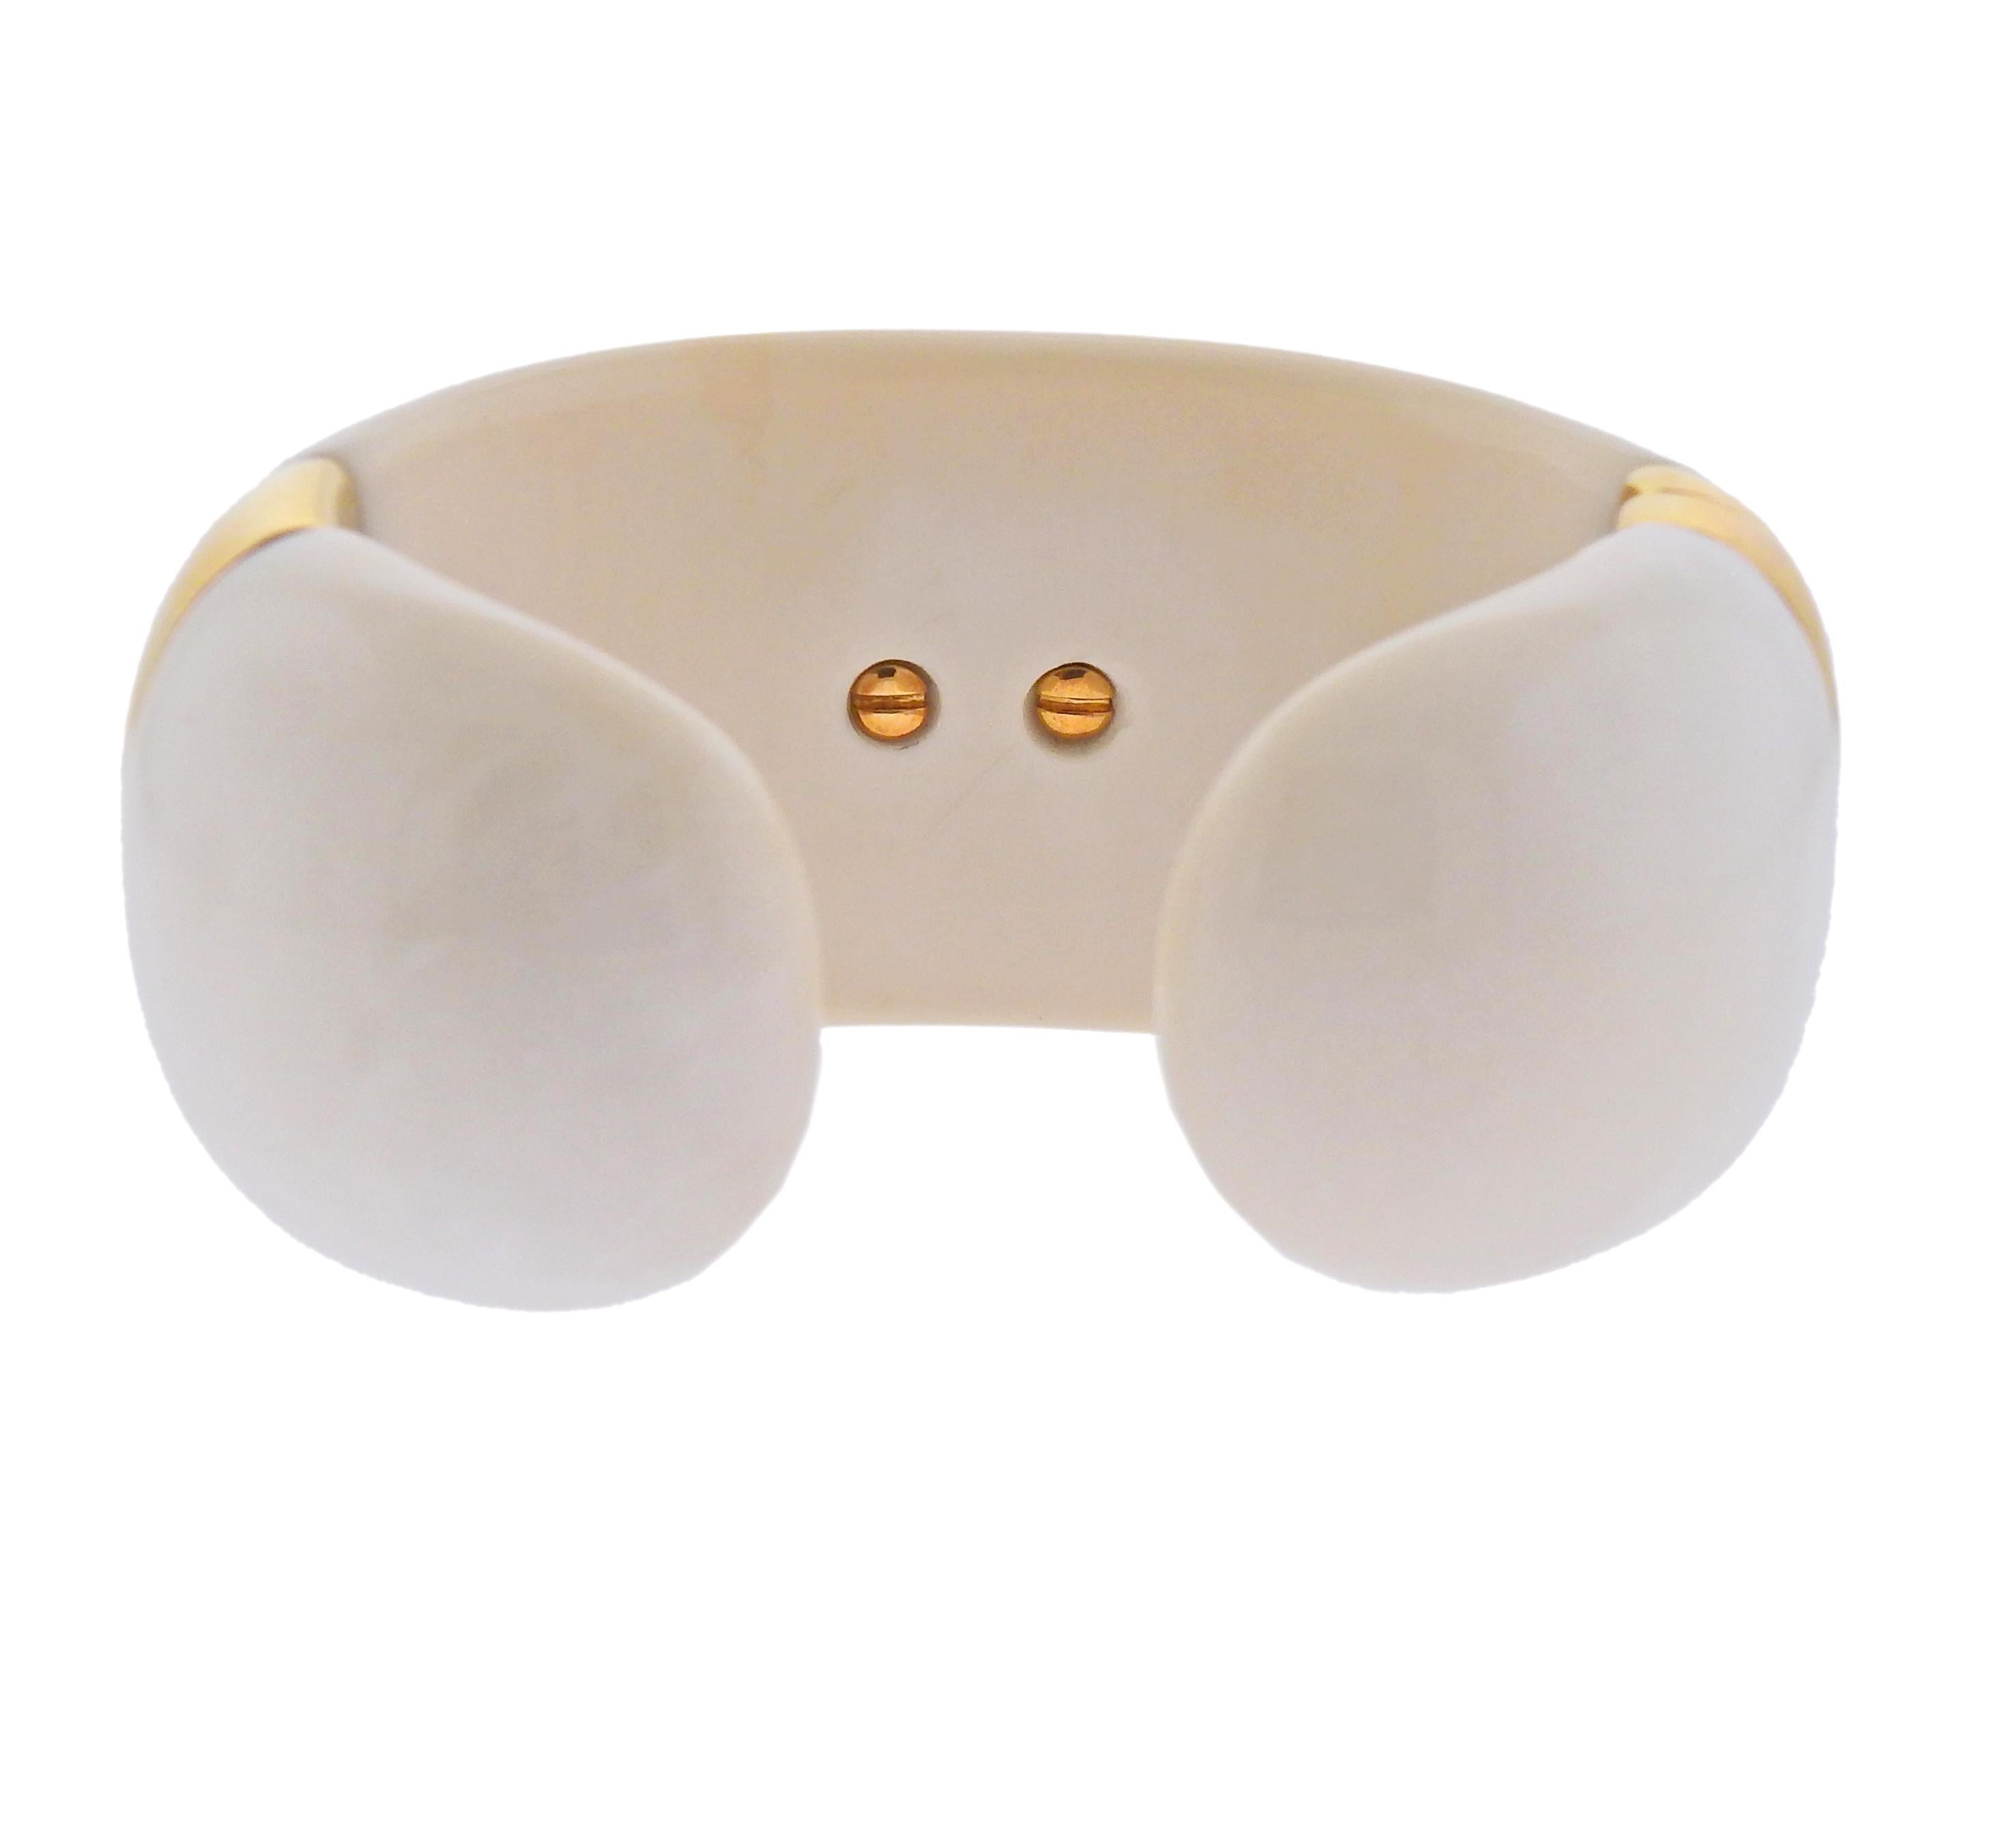 Impressive and rare Verdura 18k gold cuff bracelet, in white agate with approx. 5 carats in old mine cut diamonds. Comes in original box.  Bracelet will fit approx. 6.75